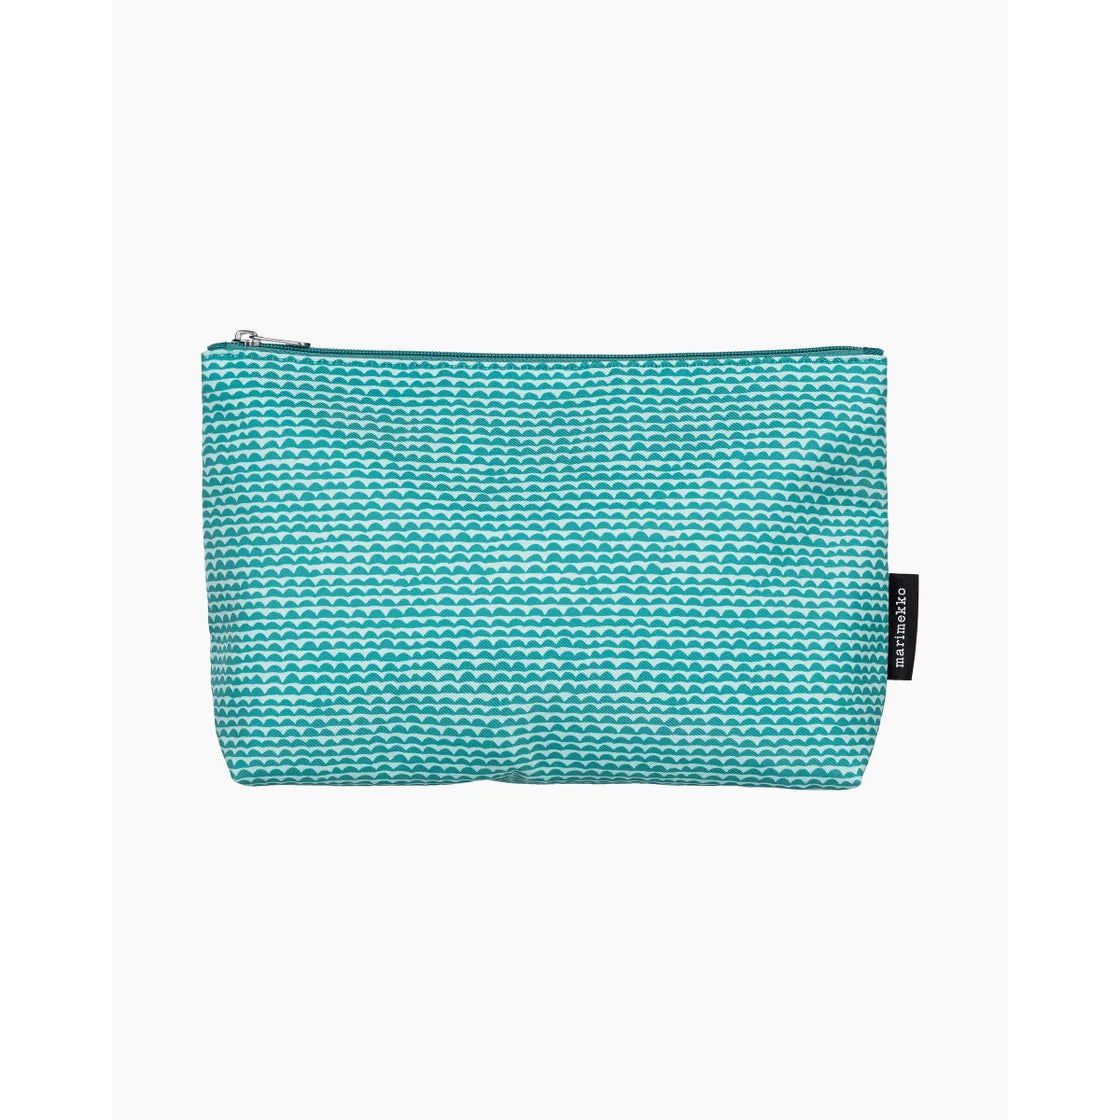 Relle Papajo cosmetic bag off white,turquoise 071507 170